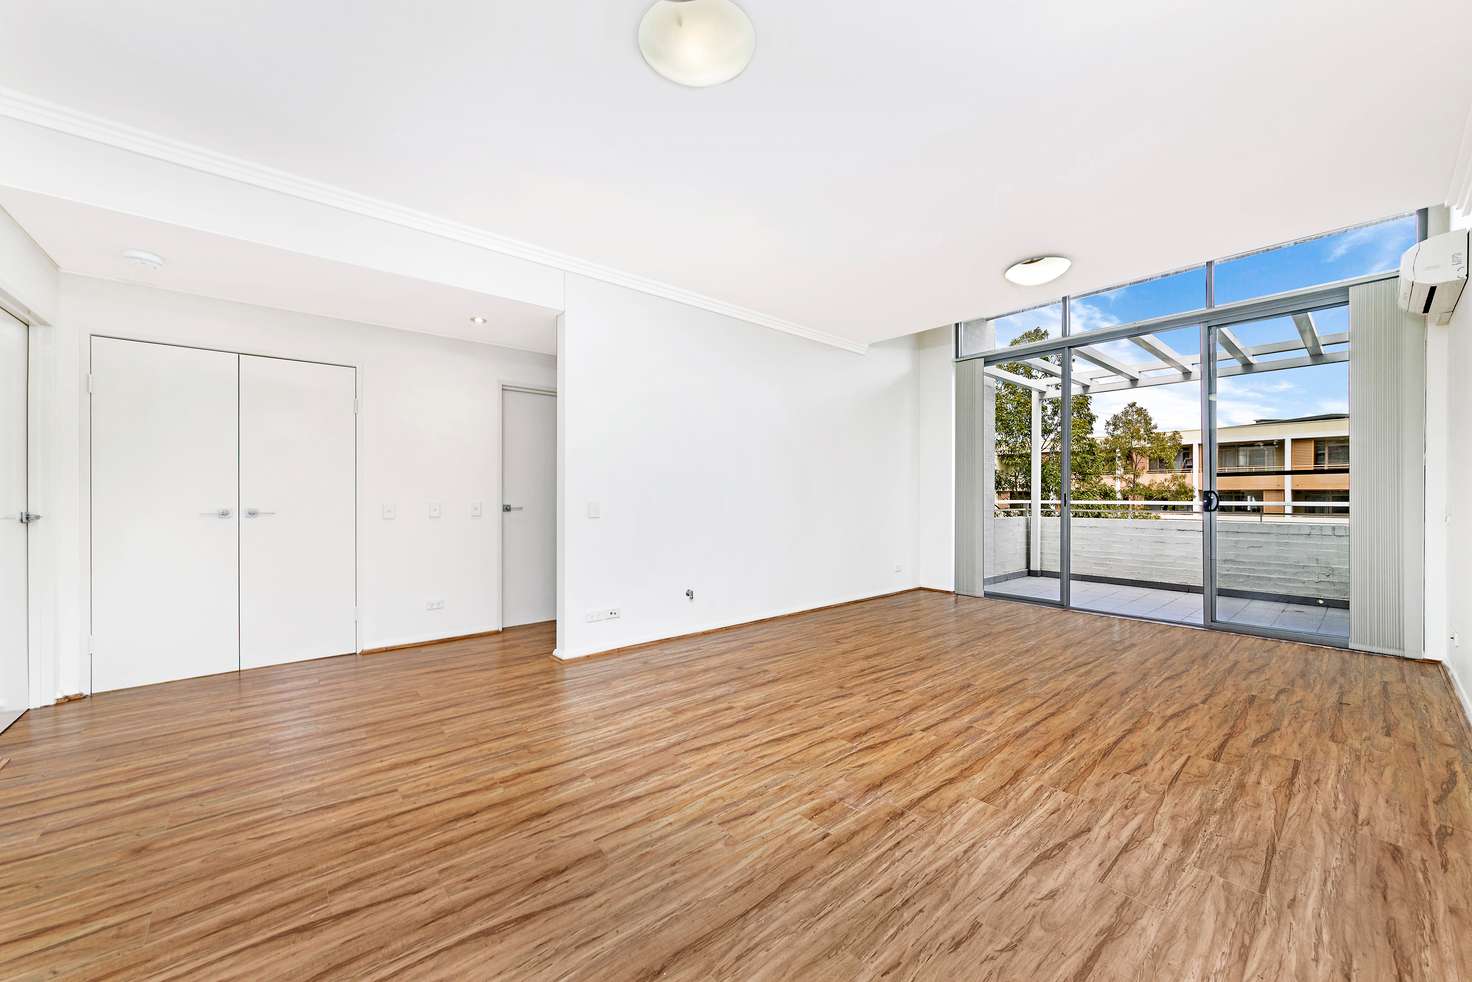 Main view of Homely apartment listing, 303/3 Stromboli Strait, Wentworth Point NSW 2127